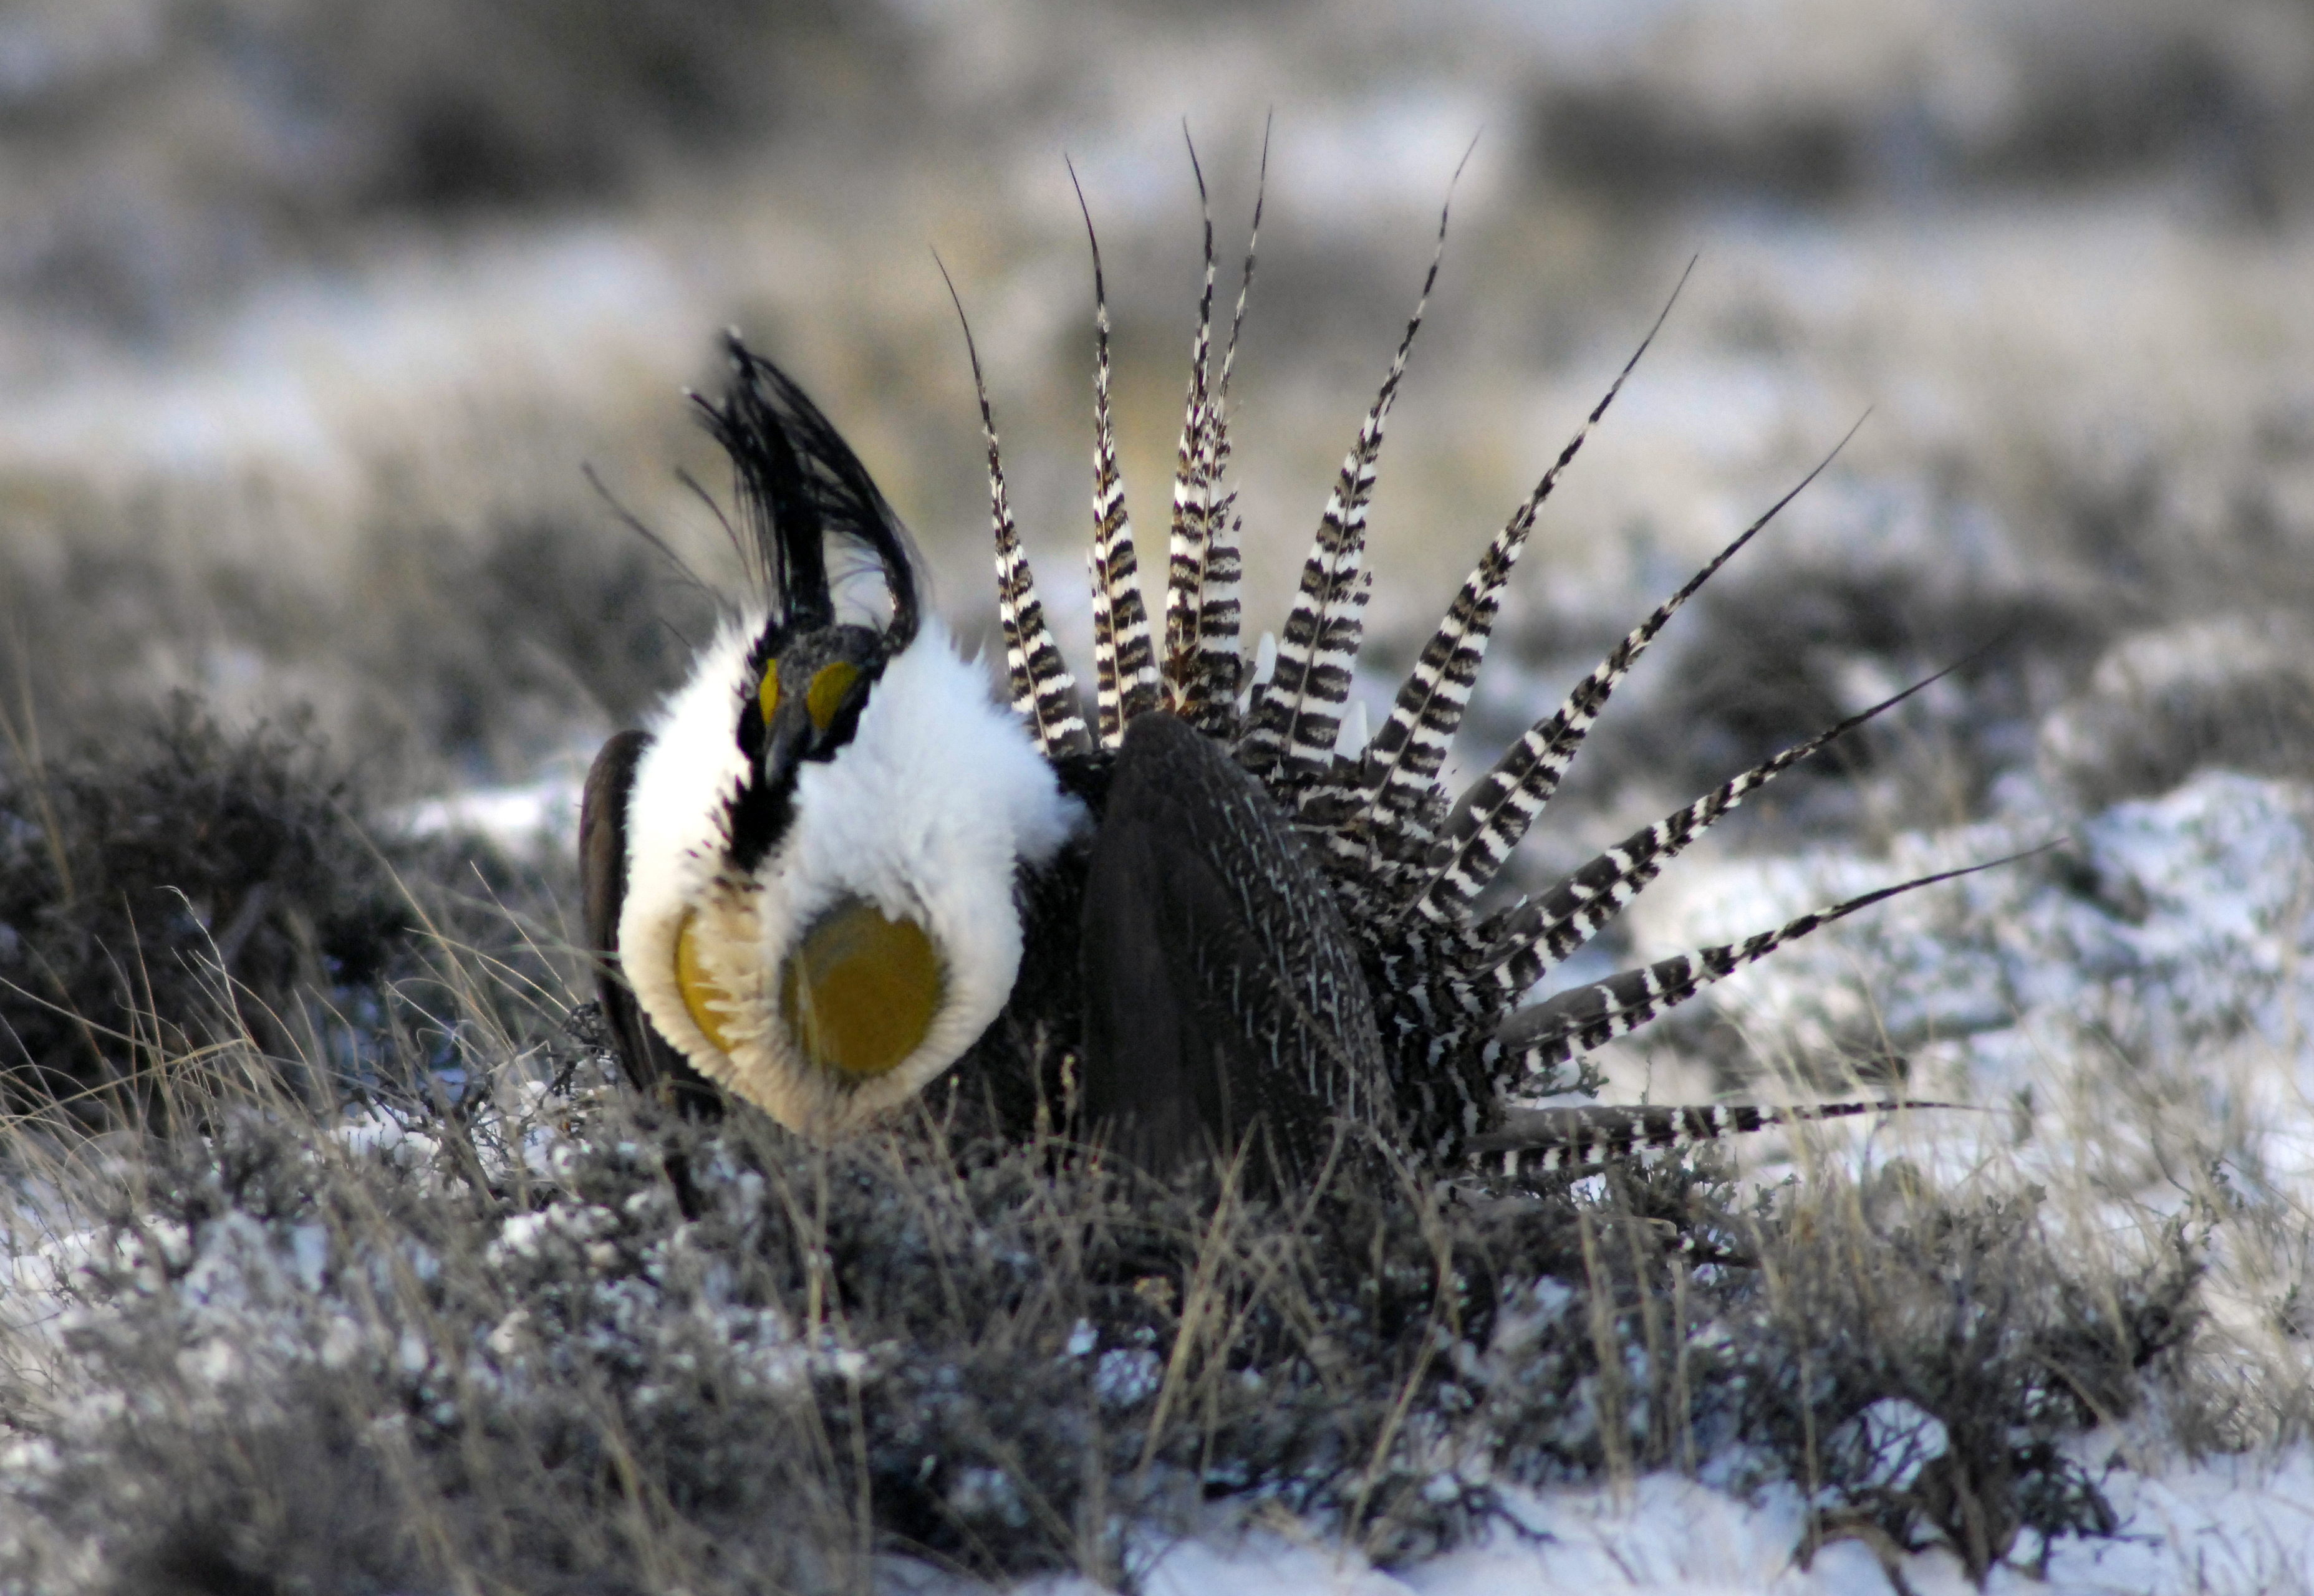 Trump Administration Targets Sage Grouse Bird for Review | Time